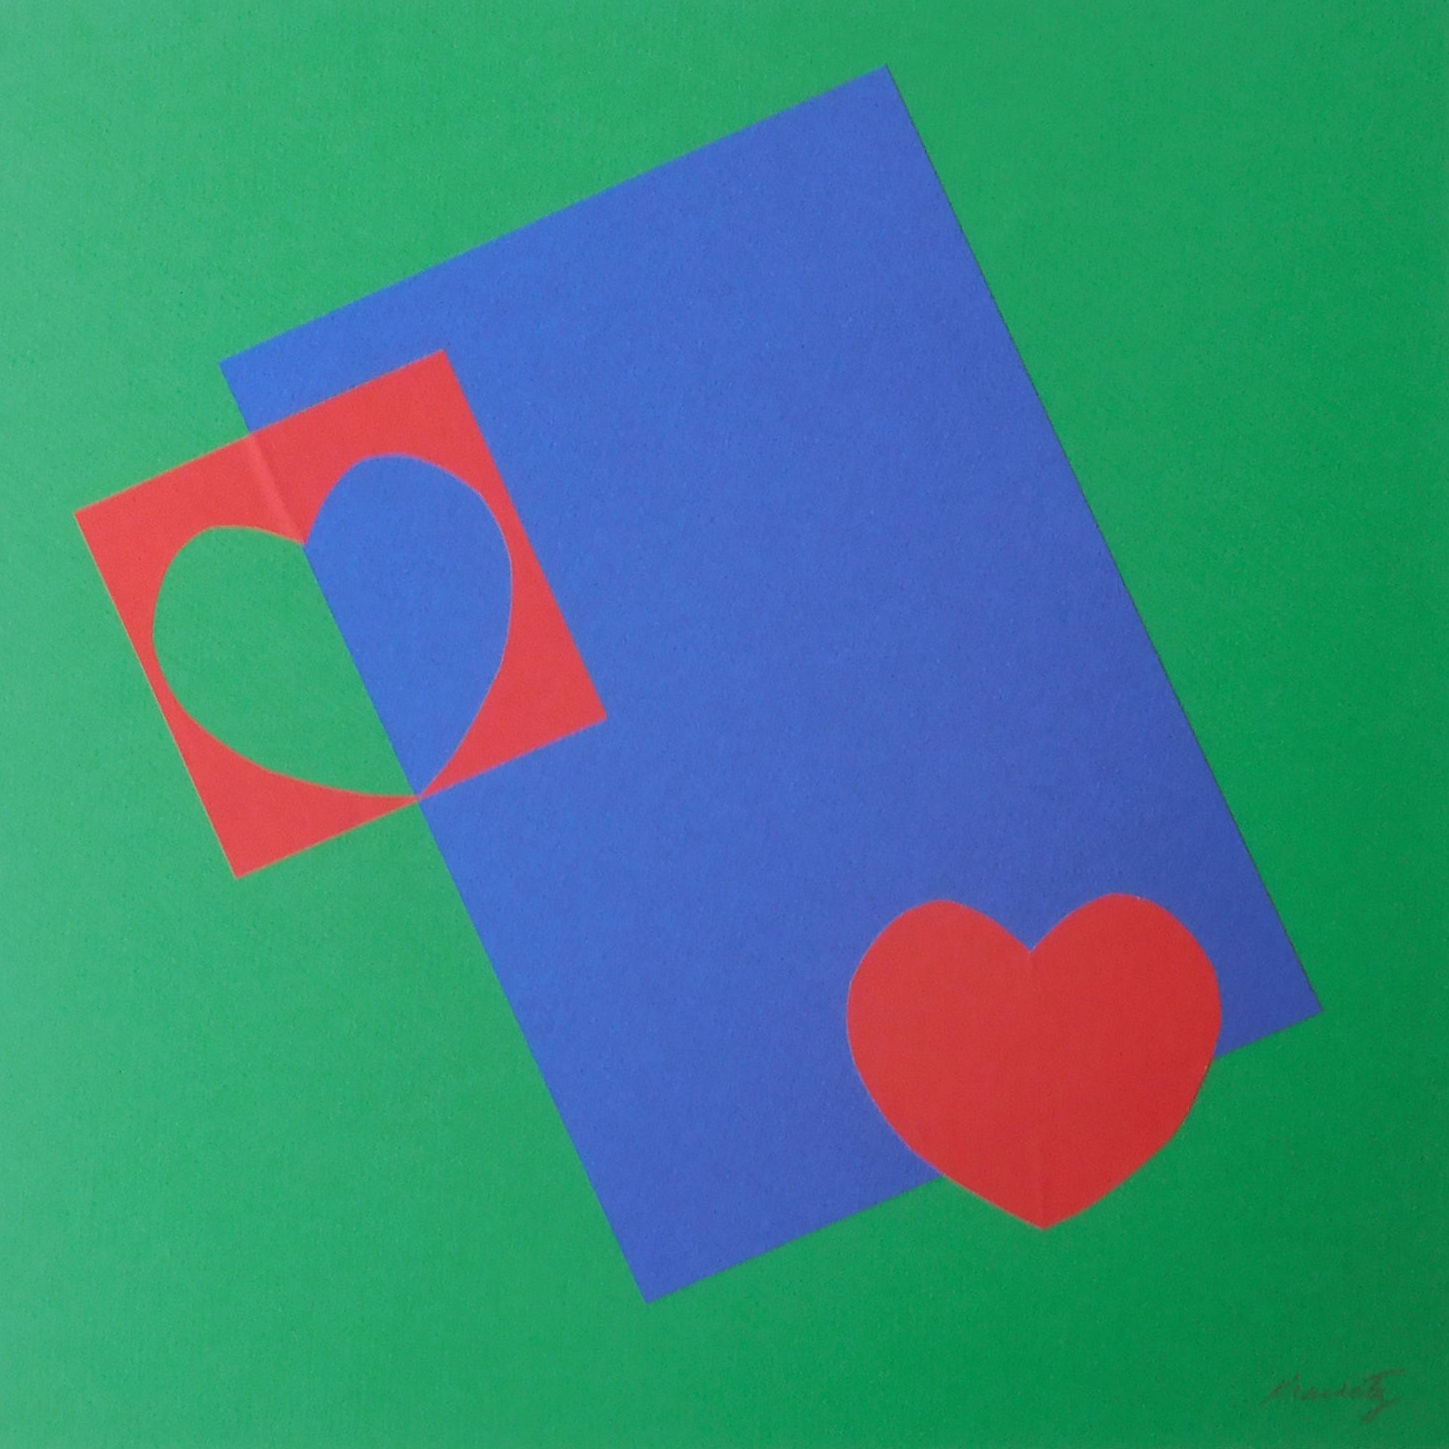 Heart of Hearts, 1985, Collage, 20x20 inches with mat